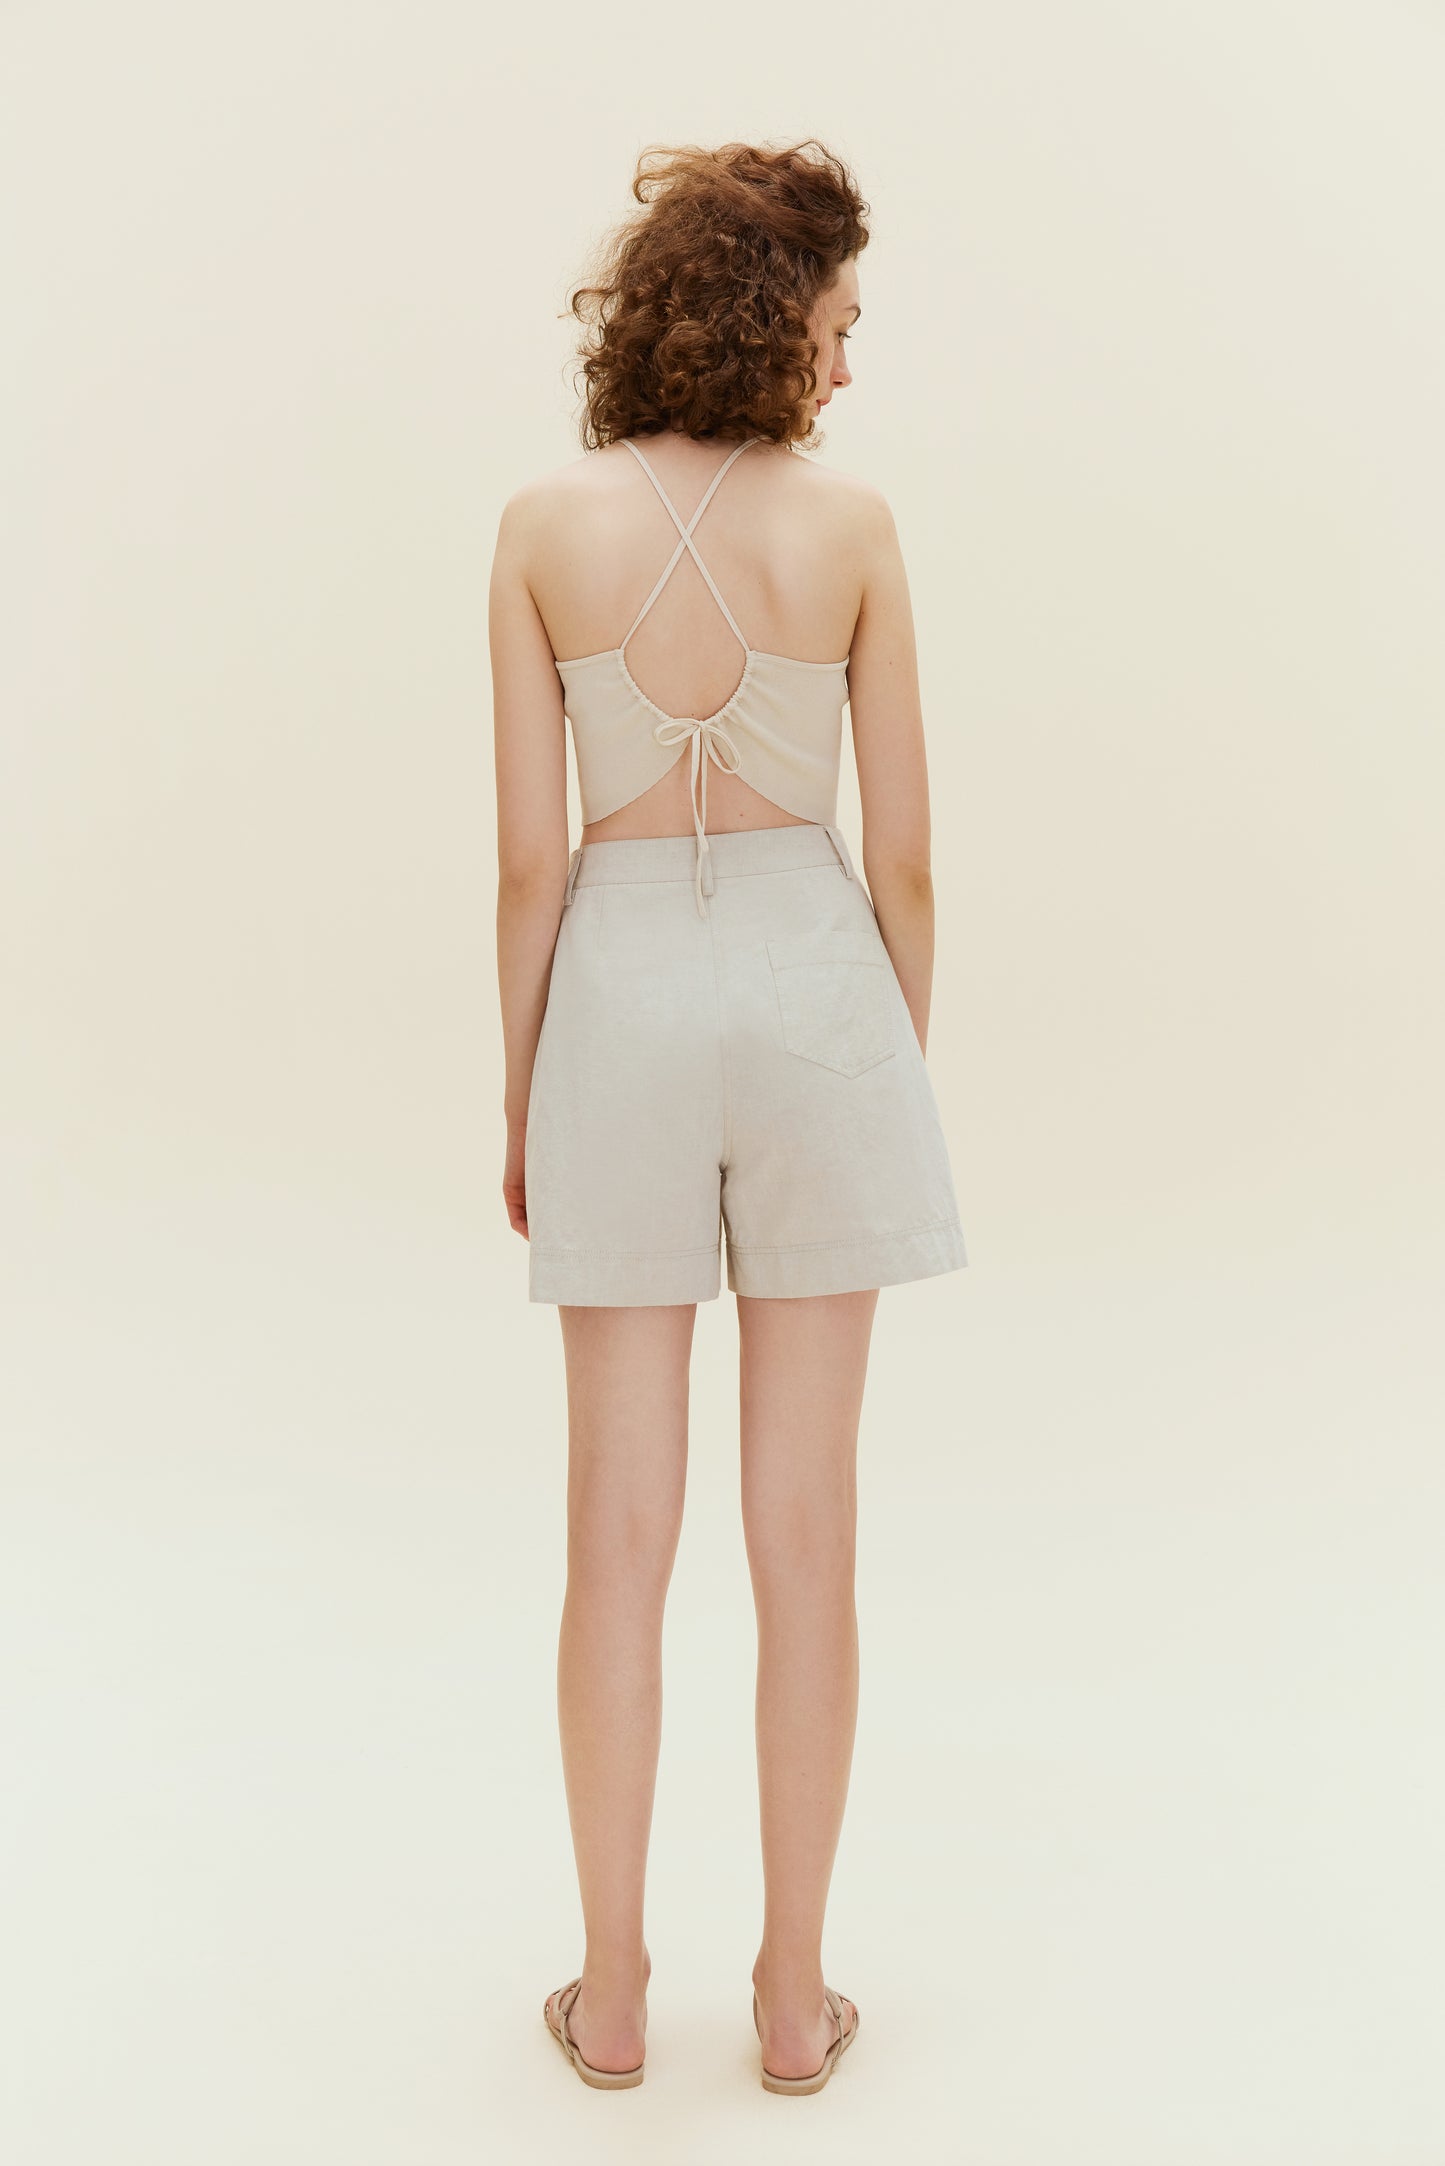 Back view of woman standing wearing beige tank top with khaki shorts